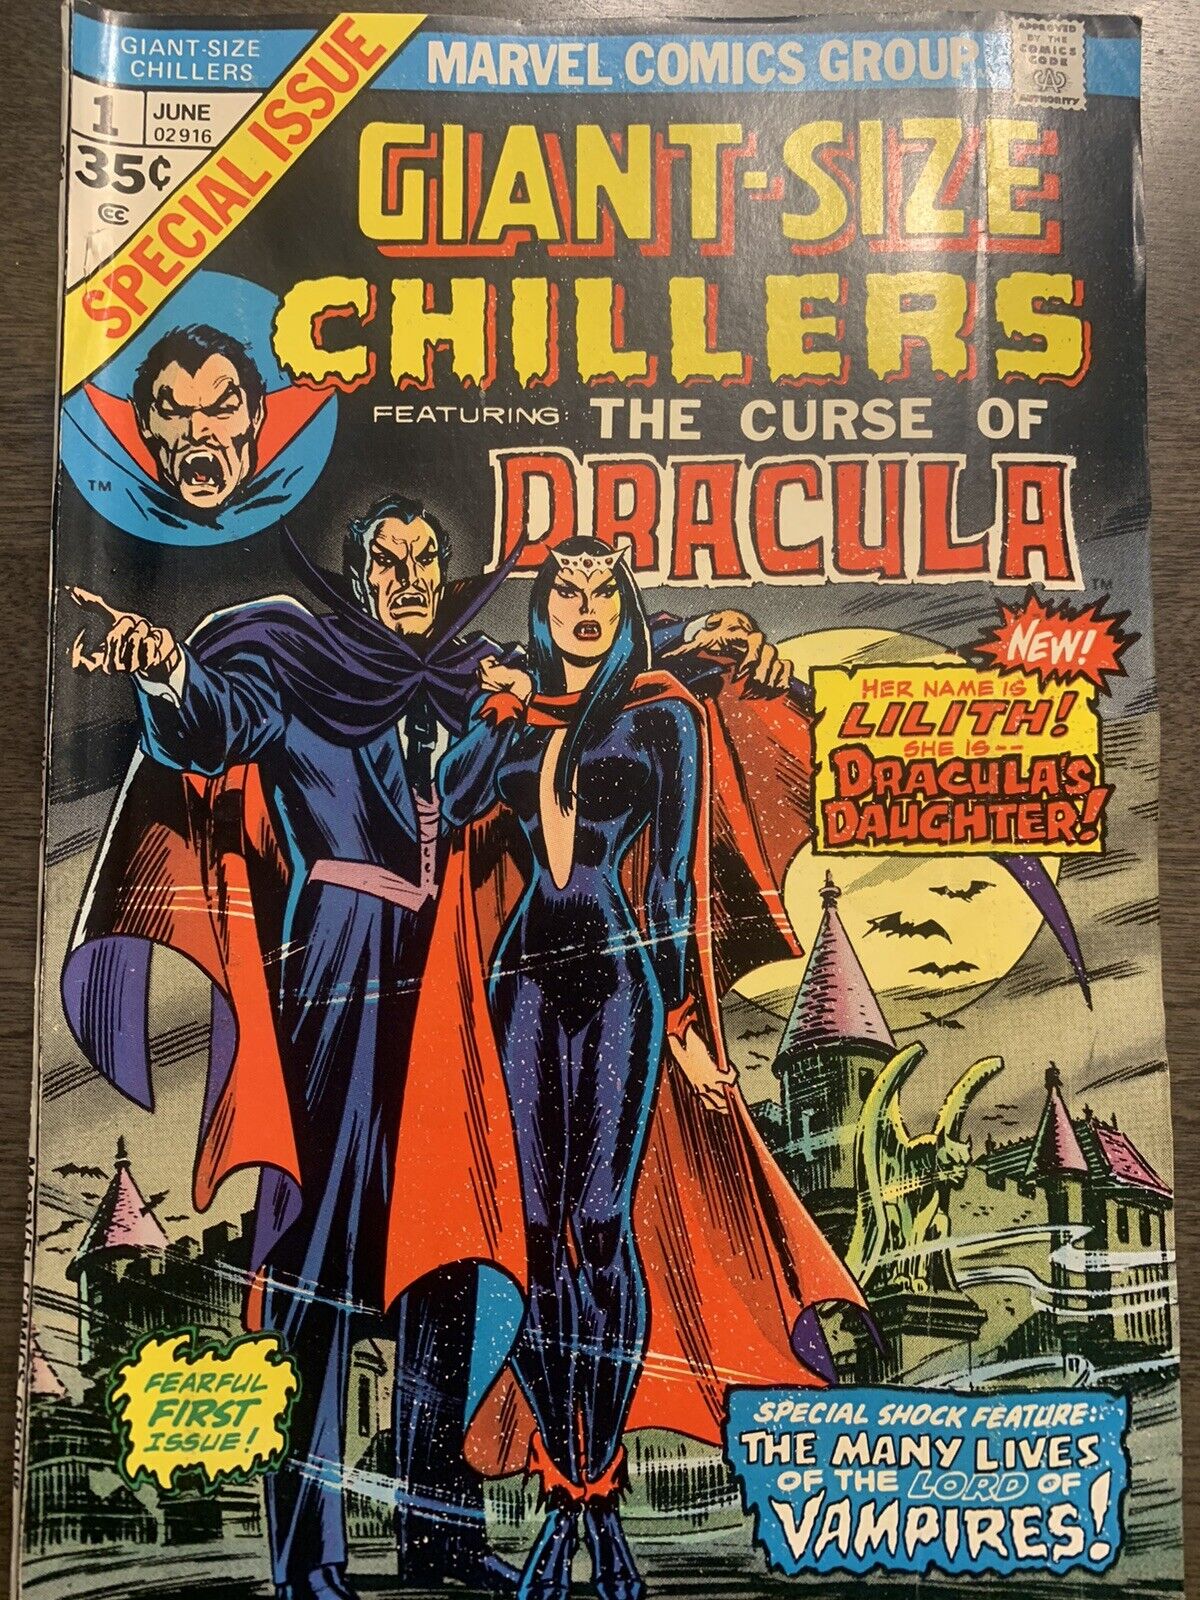 THE CURSE OF DRACULA Special Issue Giant Size Chillers Marvel Comics Group 1974